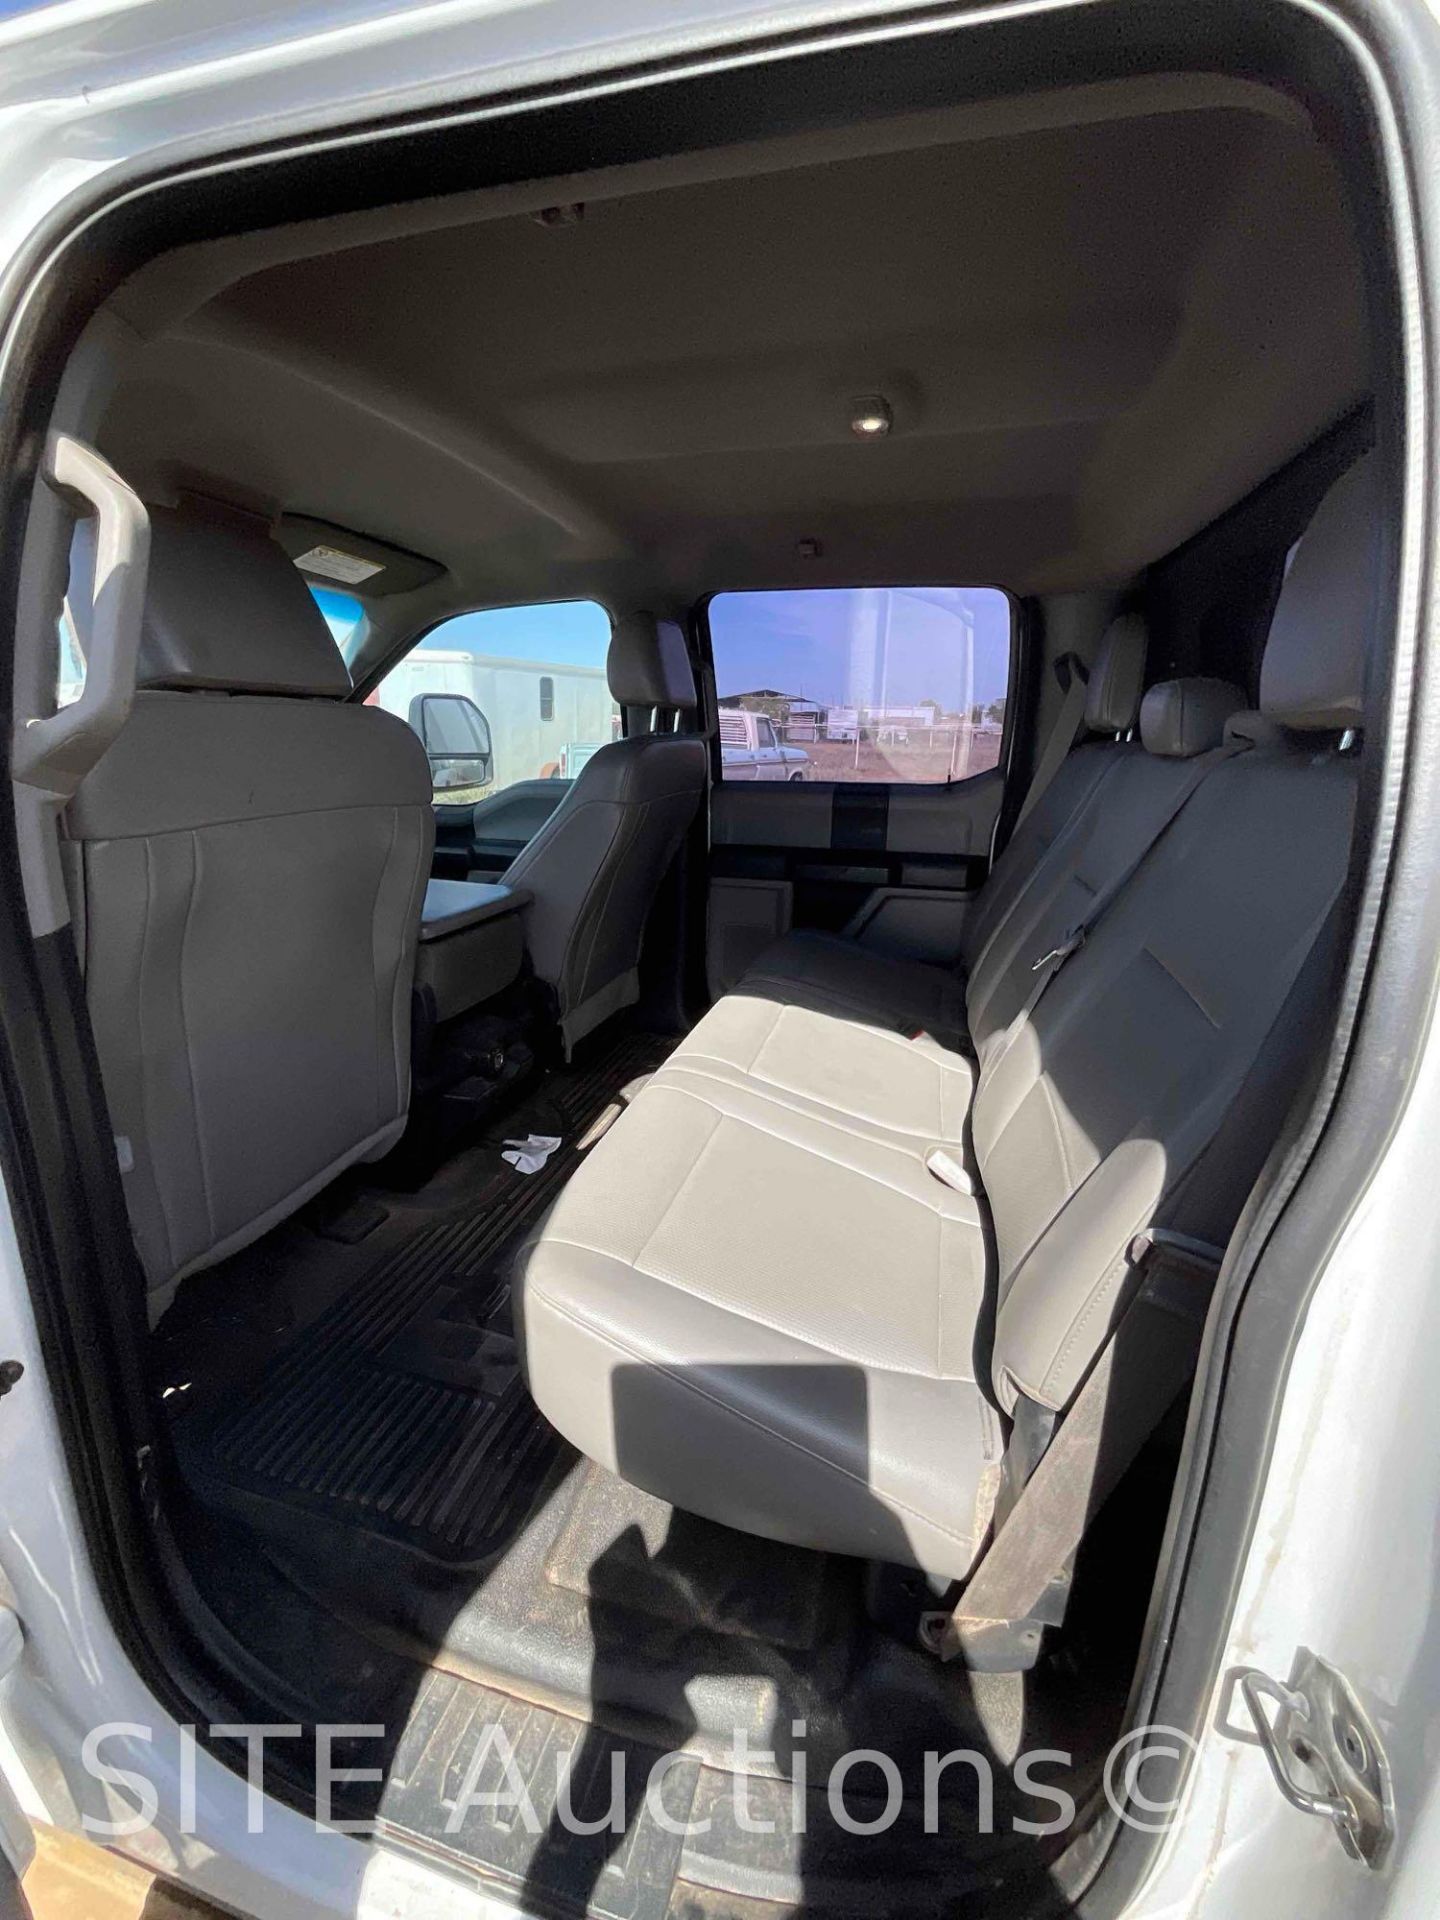 2018 Ford F250 SD Crew Cab Pickup Truck - Image 19 of 20